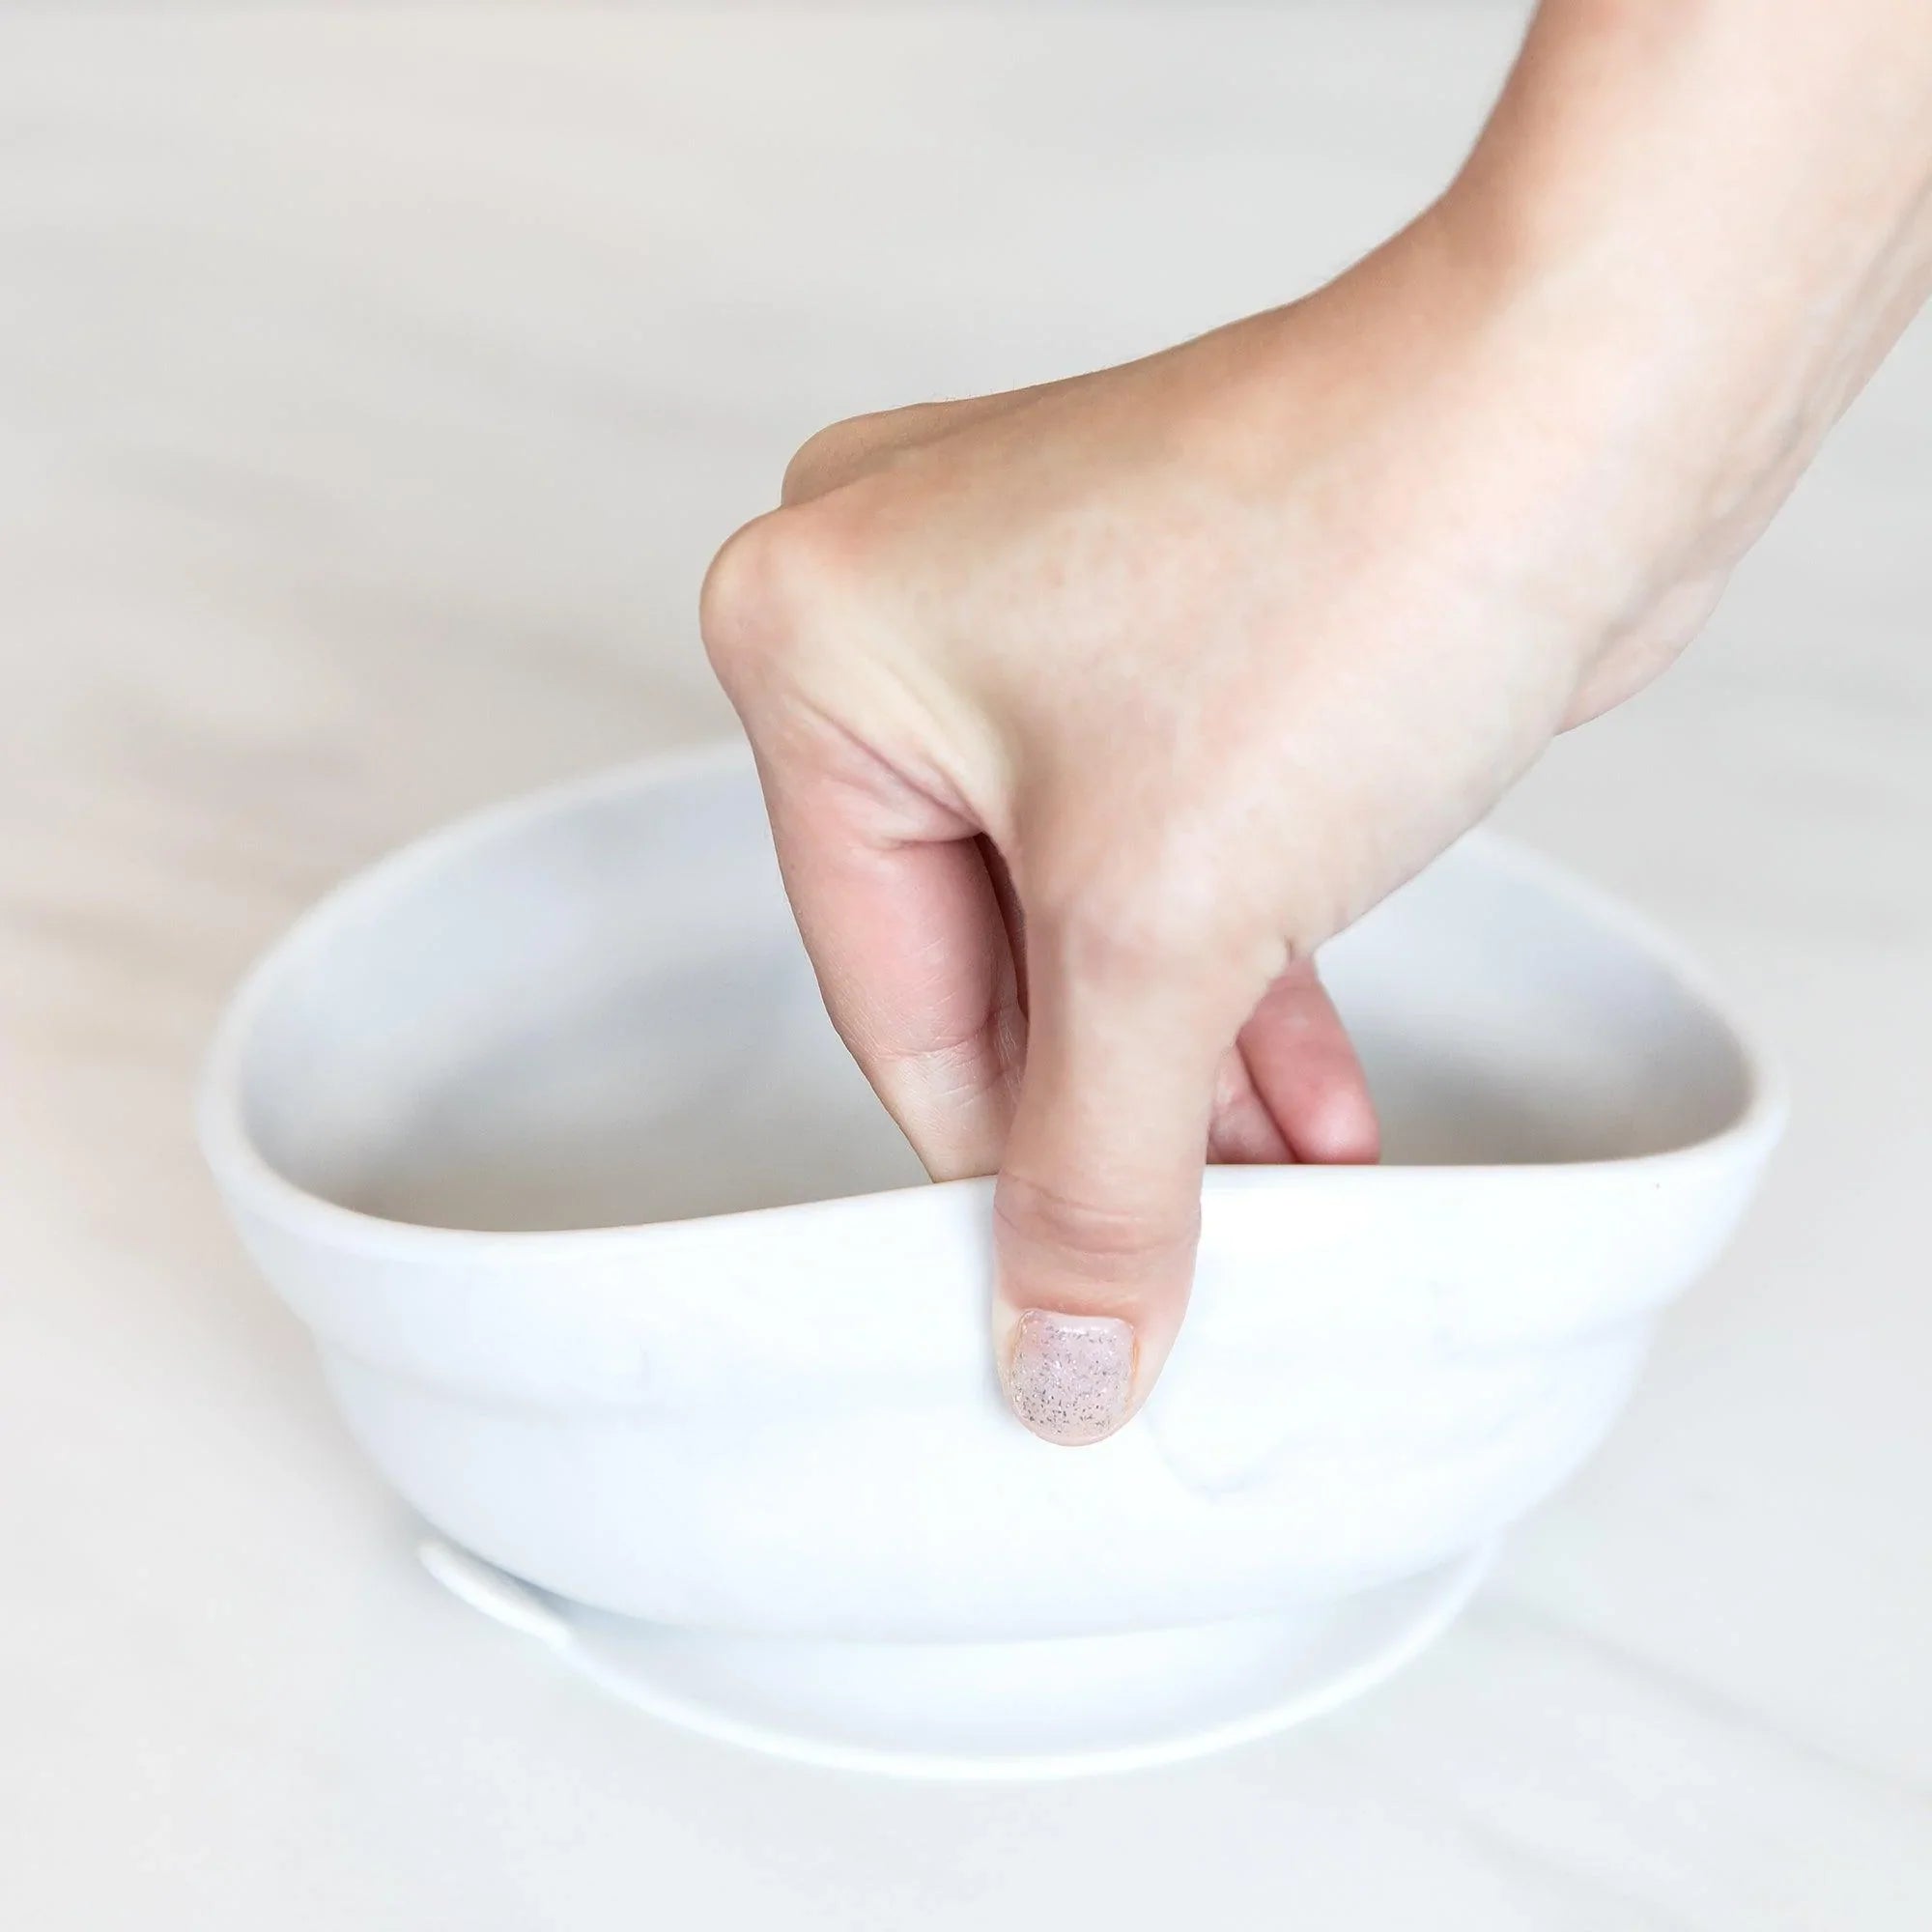 Silicone Grip Bowl: Marble - Bumkins